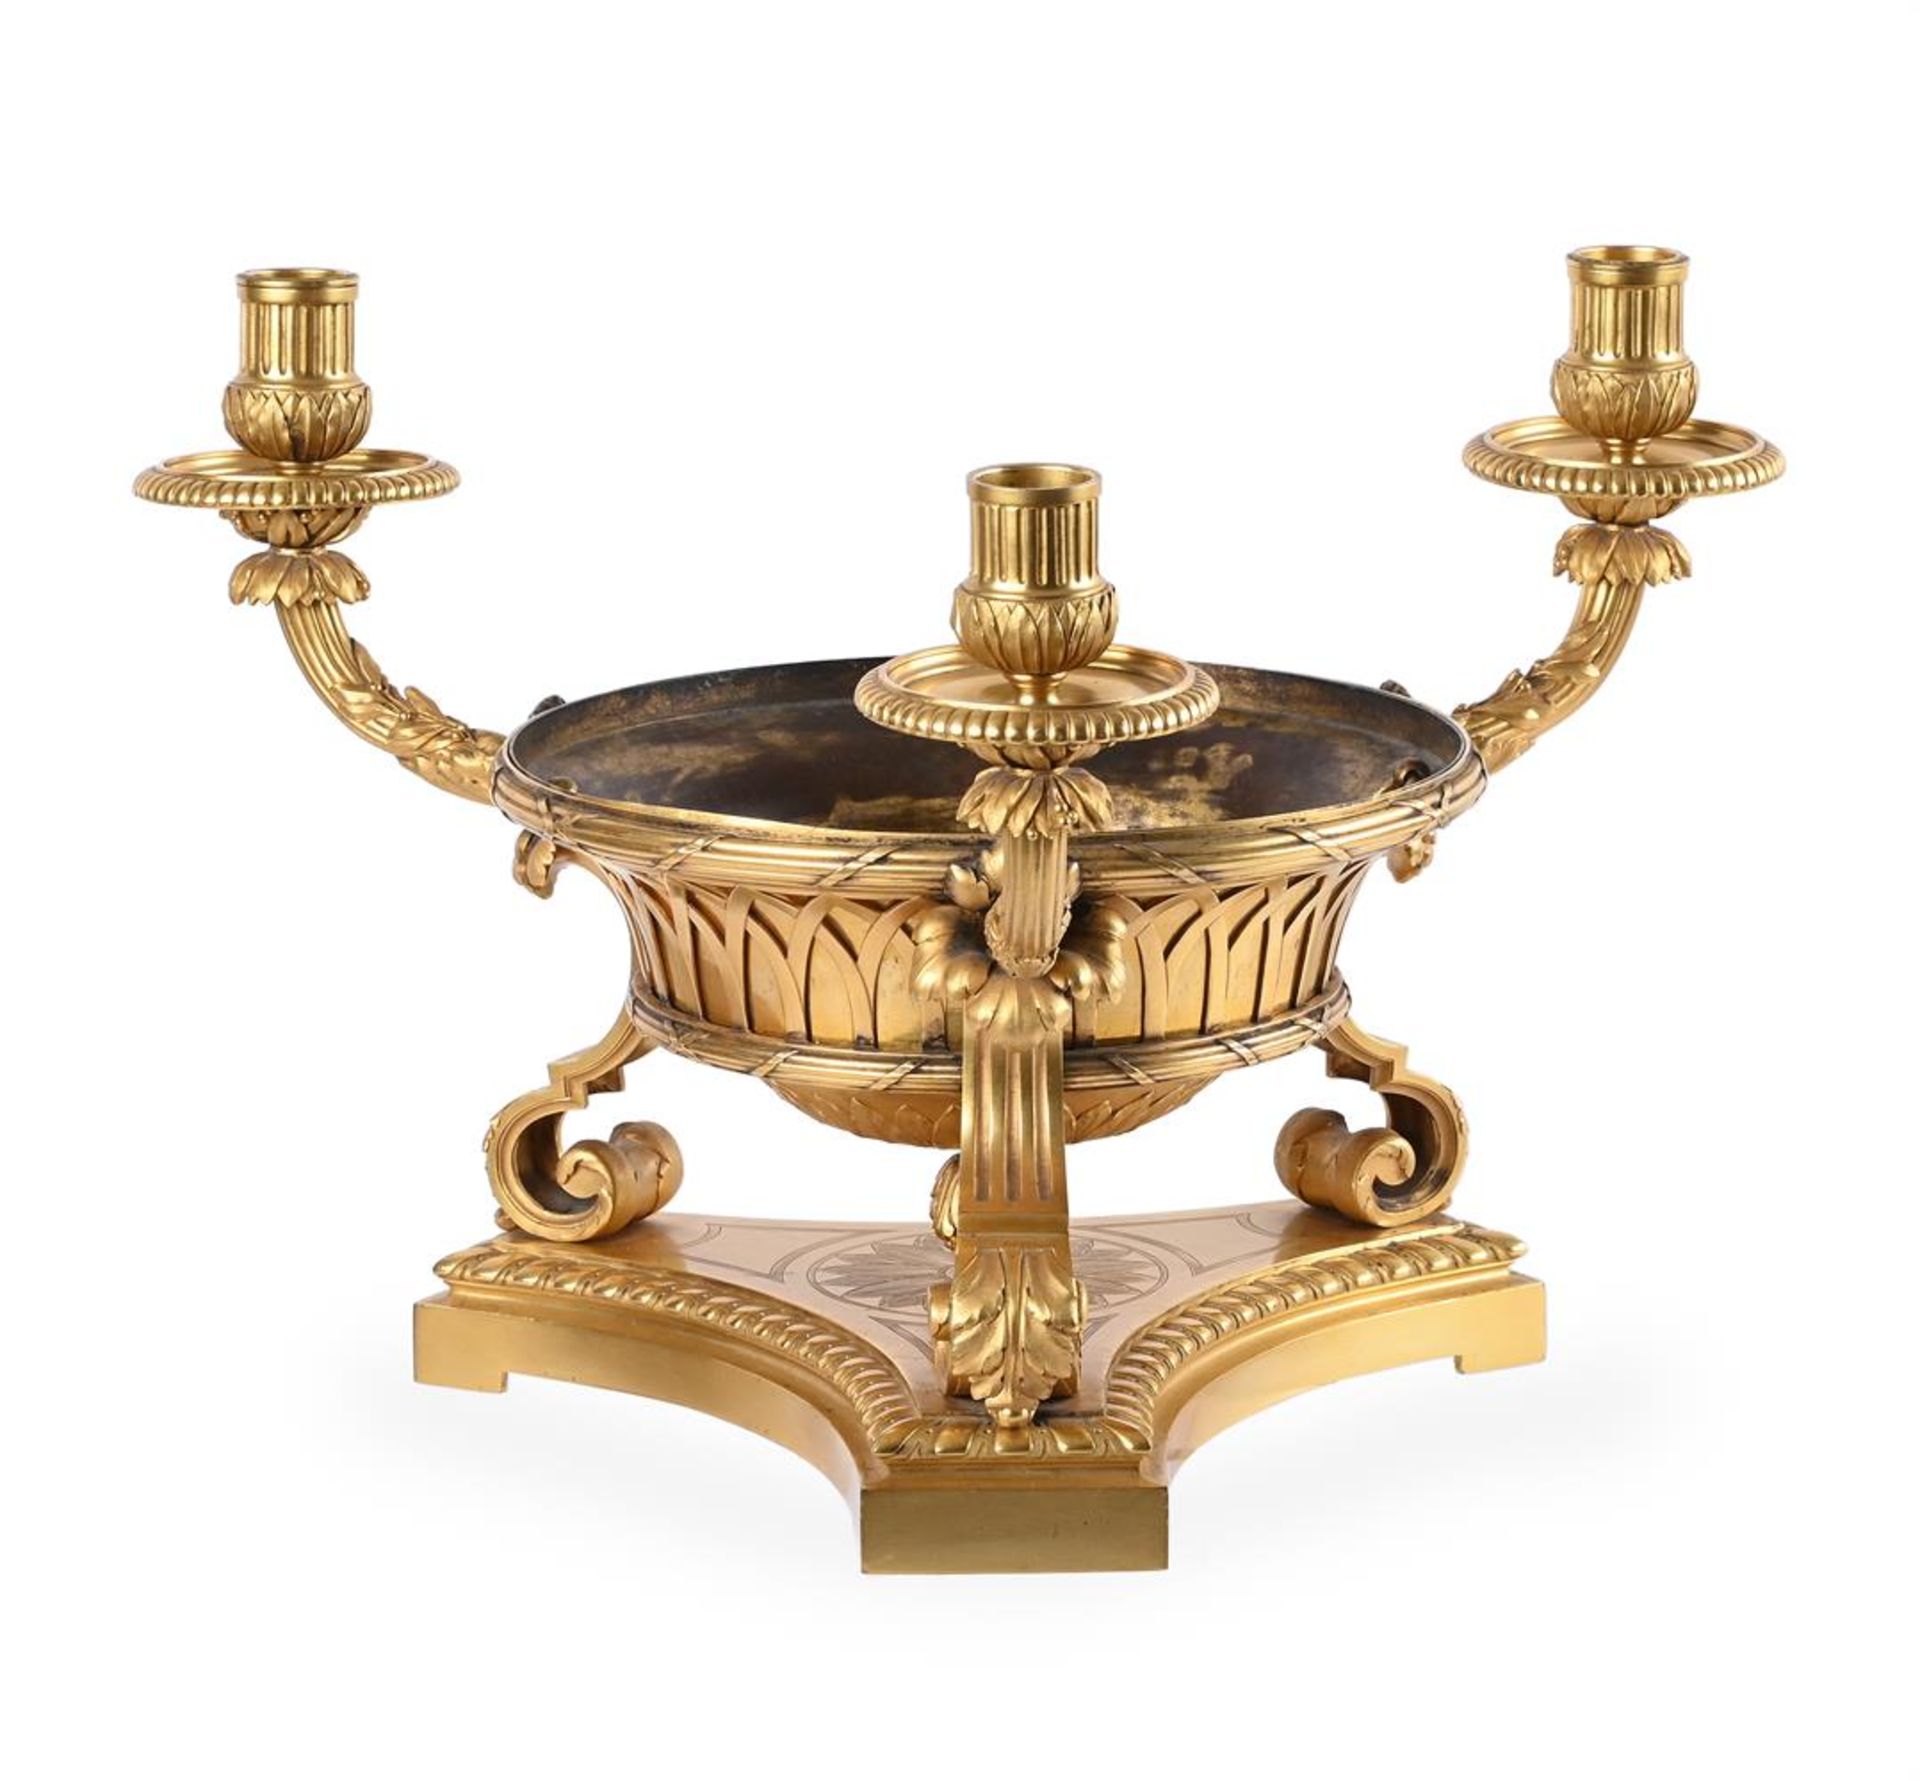 BOIN-TABURET (EST. 1873), AN ORMOLU CENTREPIECE, FRENCH, LATE 19TH/EARLY 20TH CENTURY - Image 4 of 4